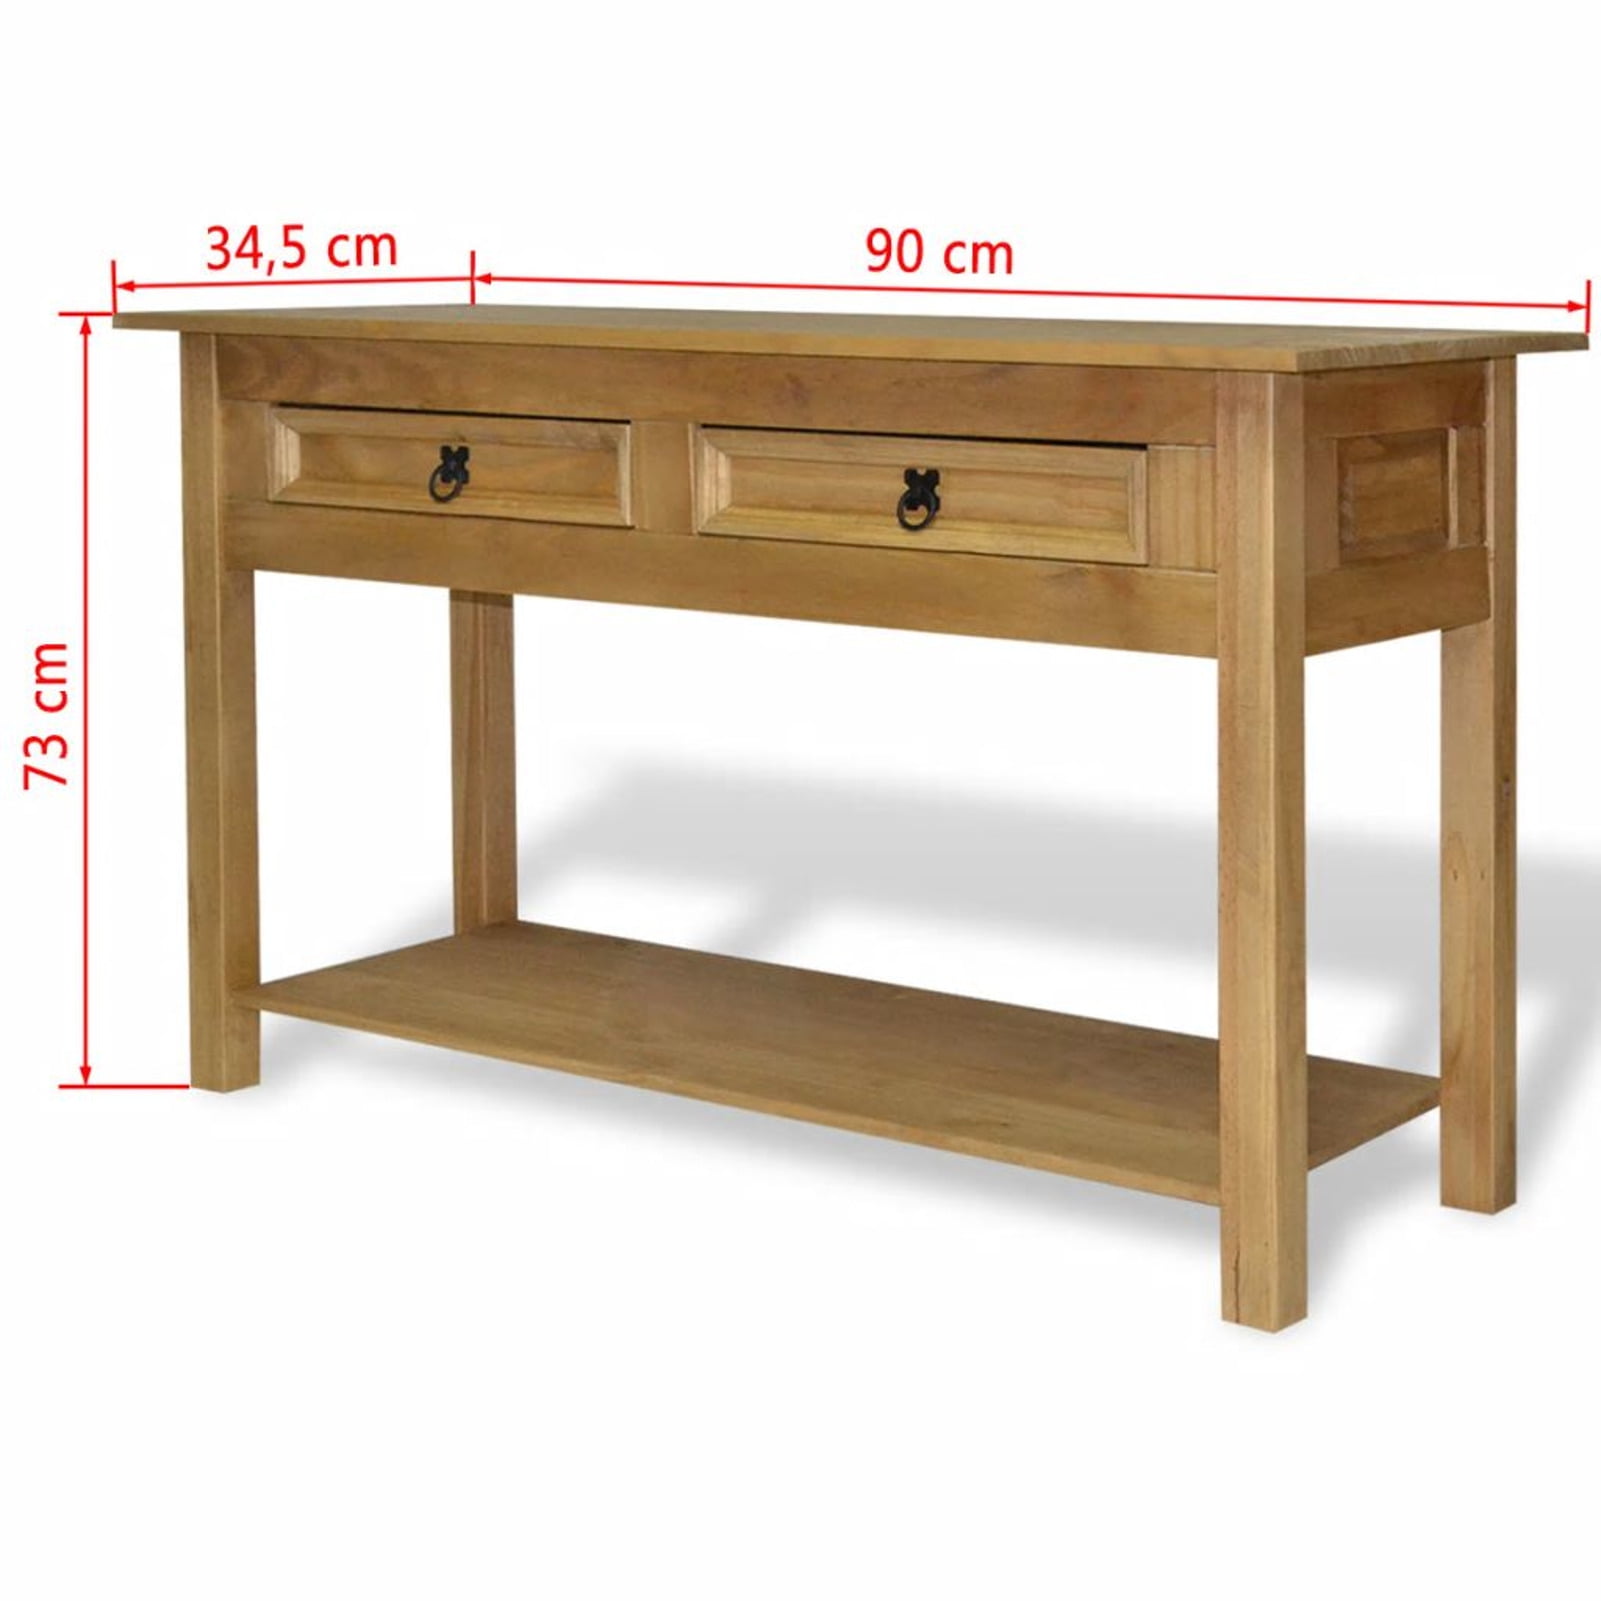 Details about   Corona Console Table 3 Drawer With Shelf Hallway Mexican Pine By Home Discount 